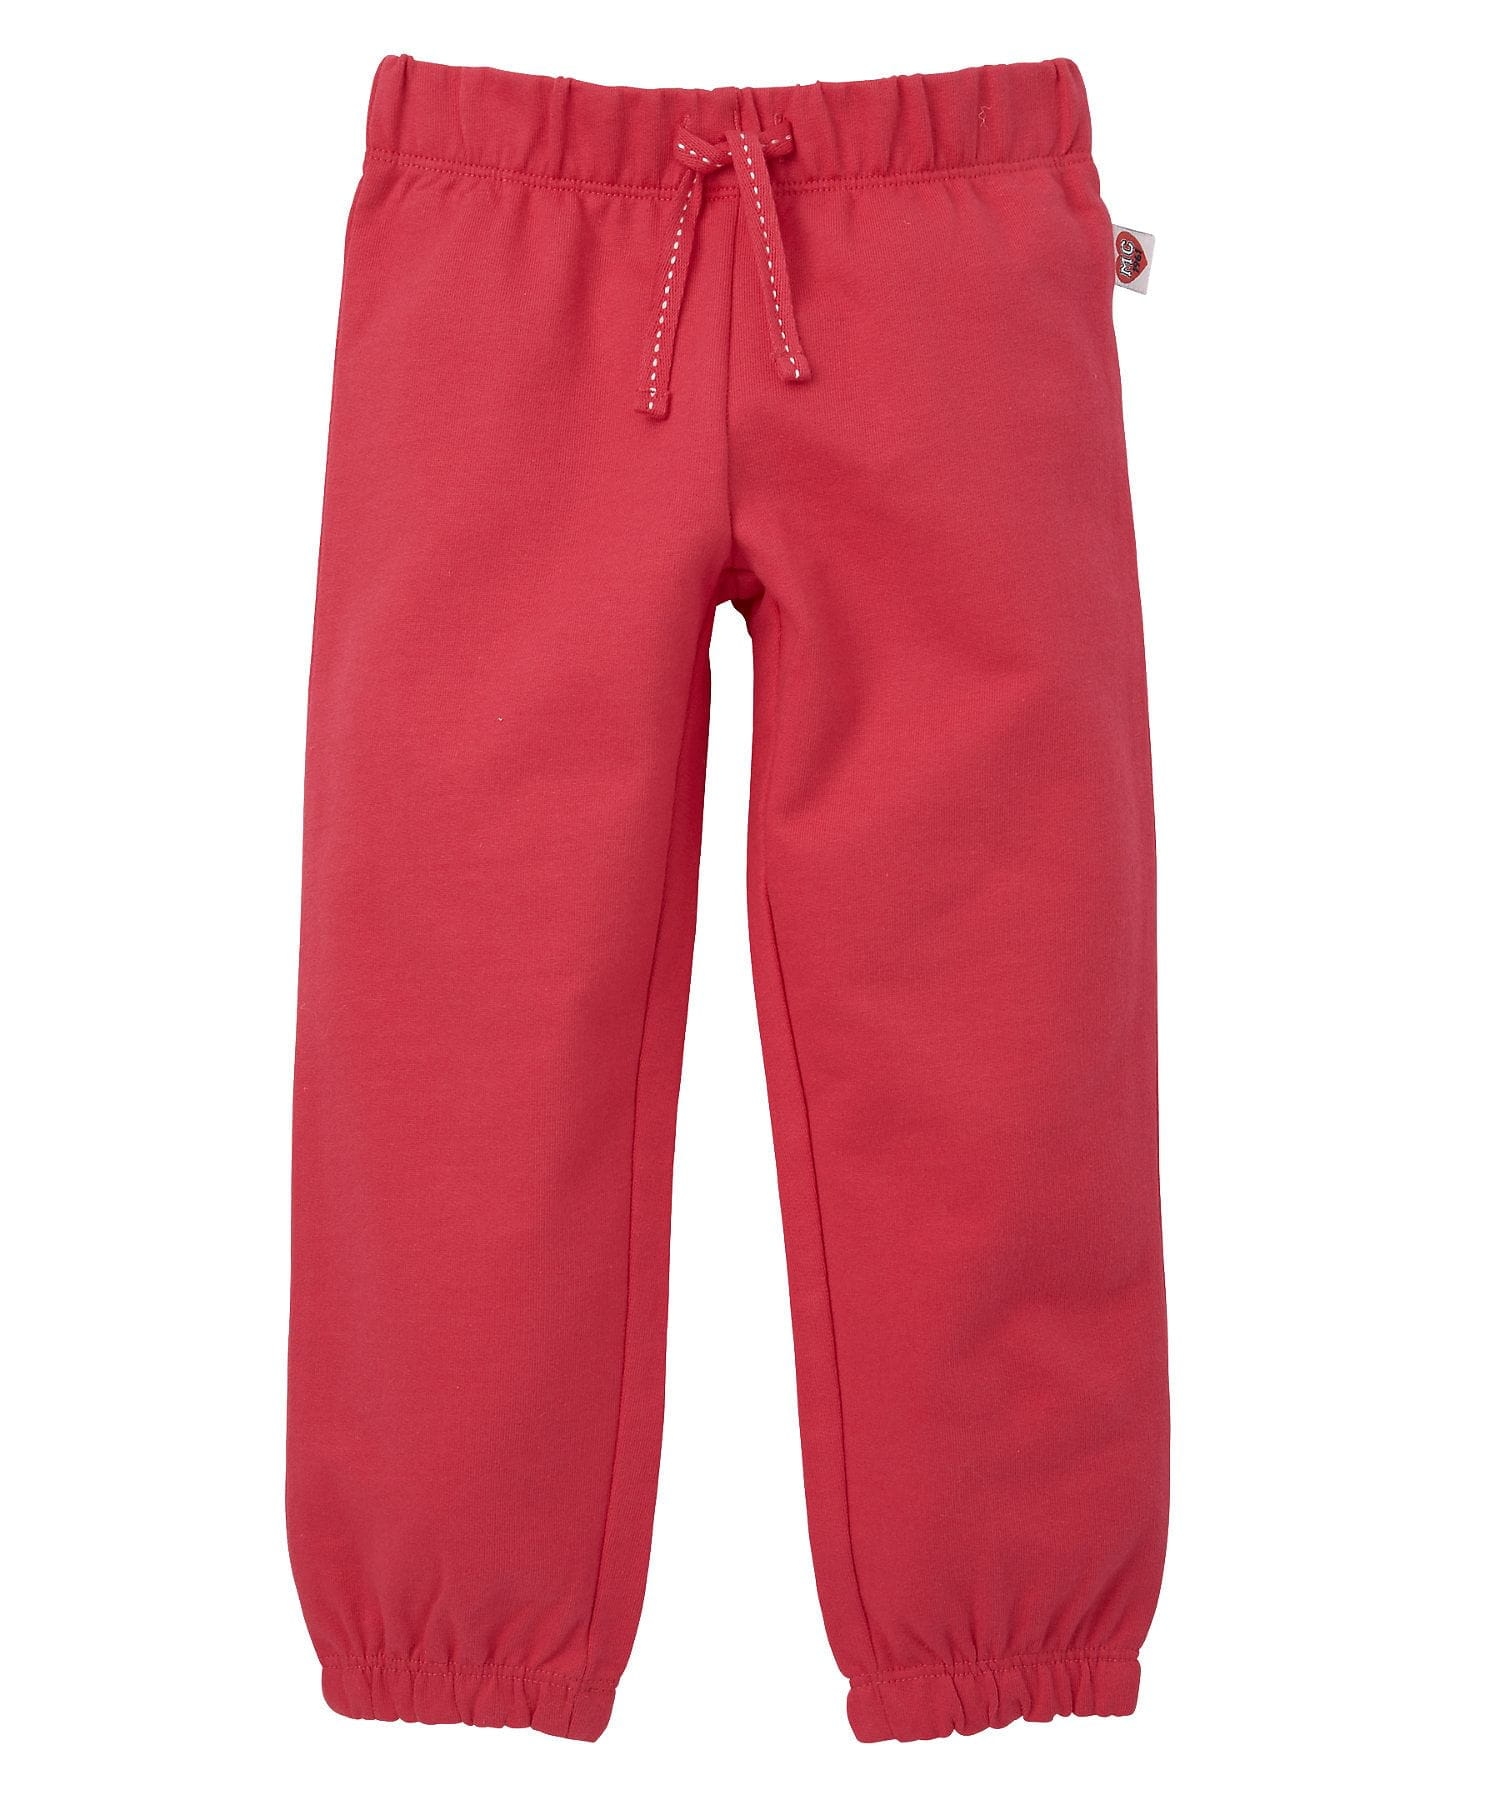 Mothercare | Girls Joggers Cuffed - Pink 0